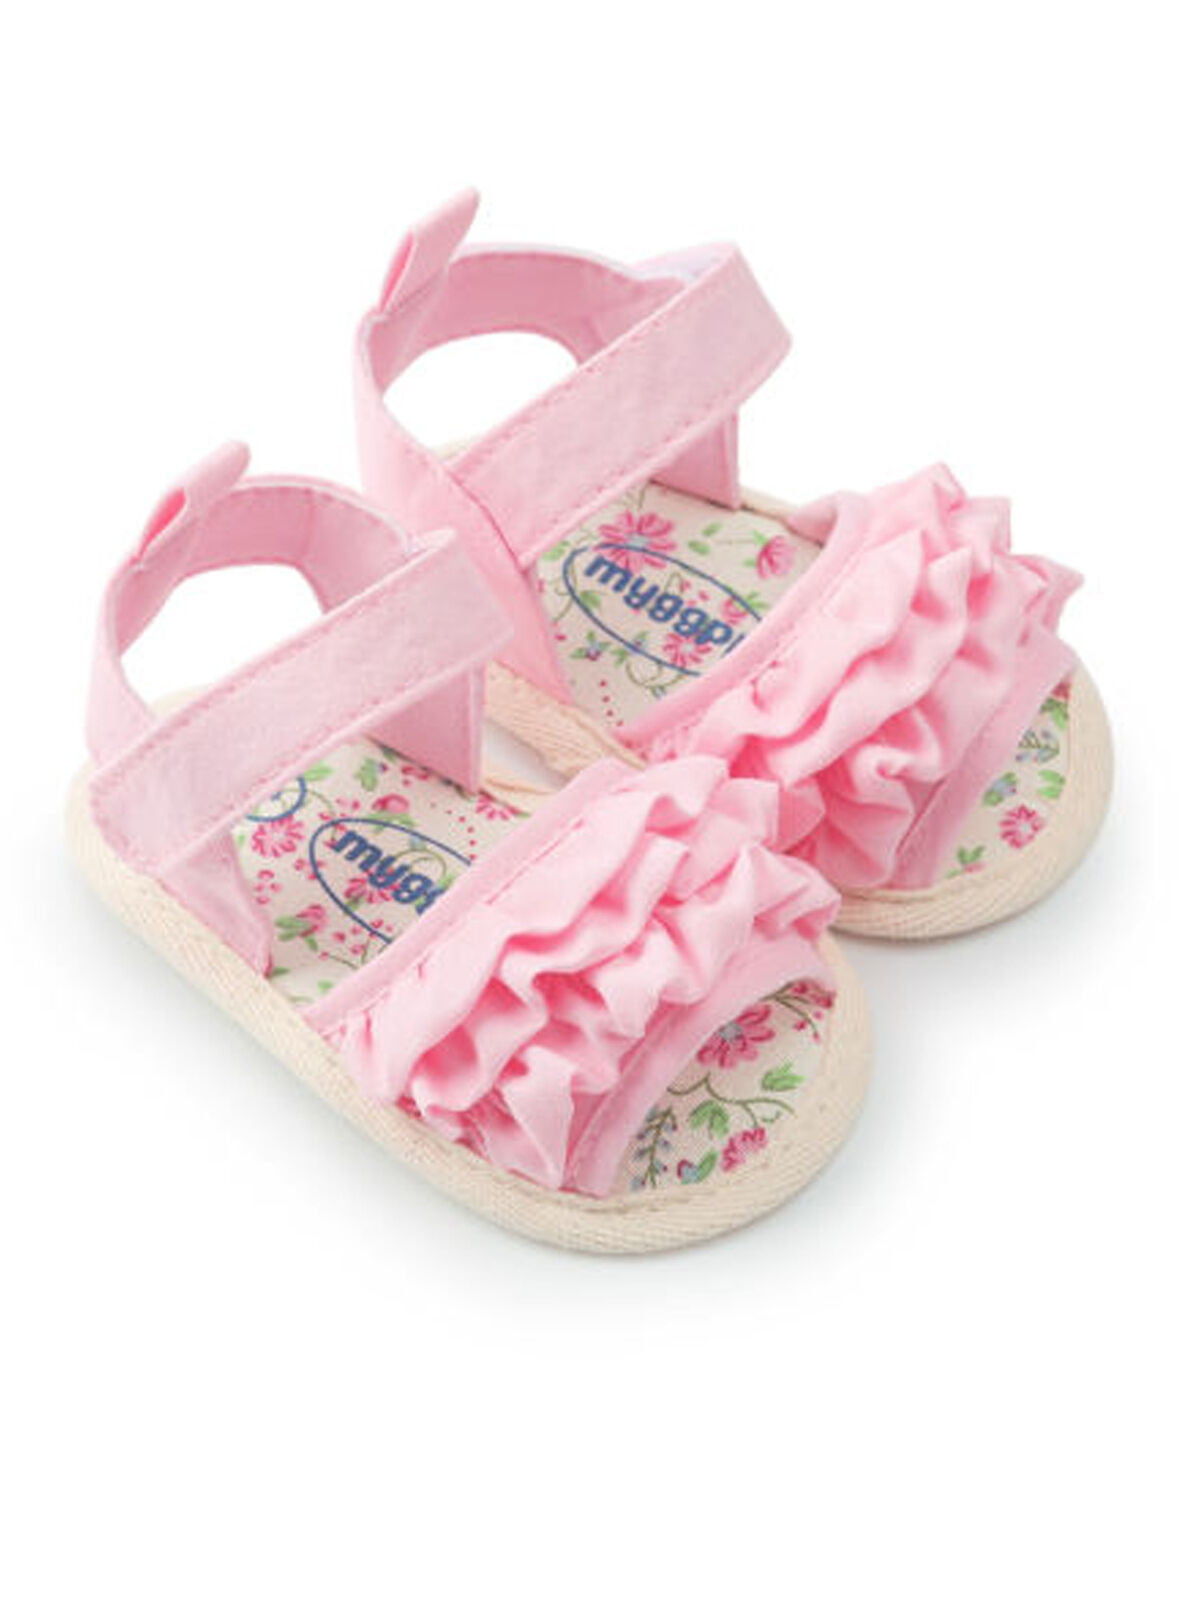 shoes for infant girl